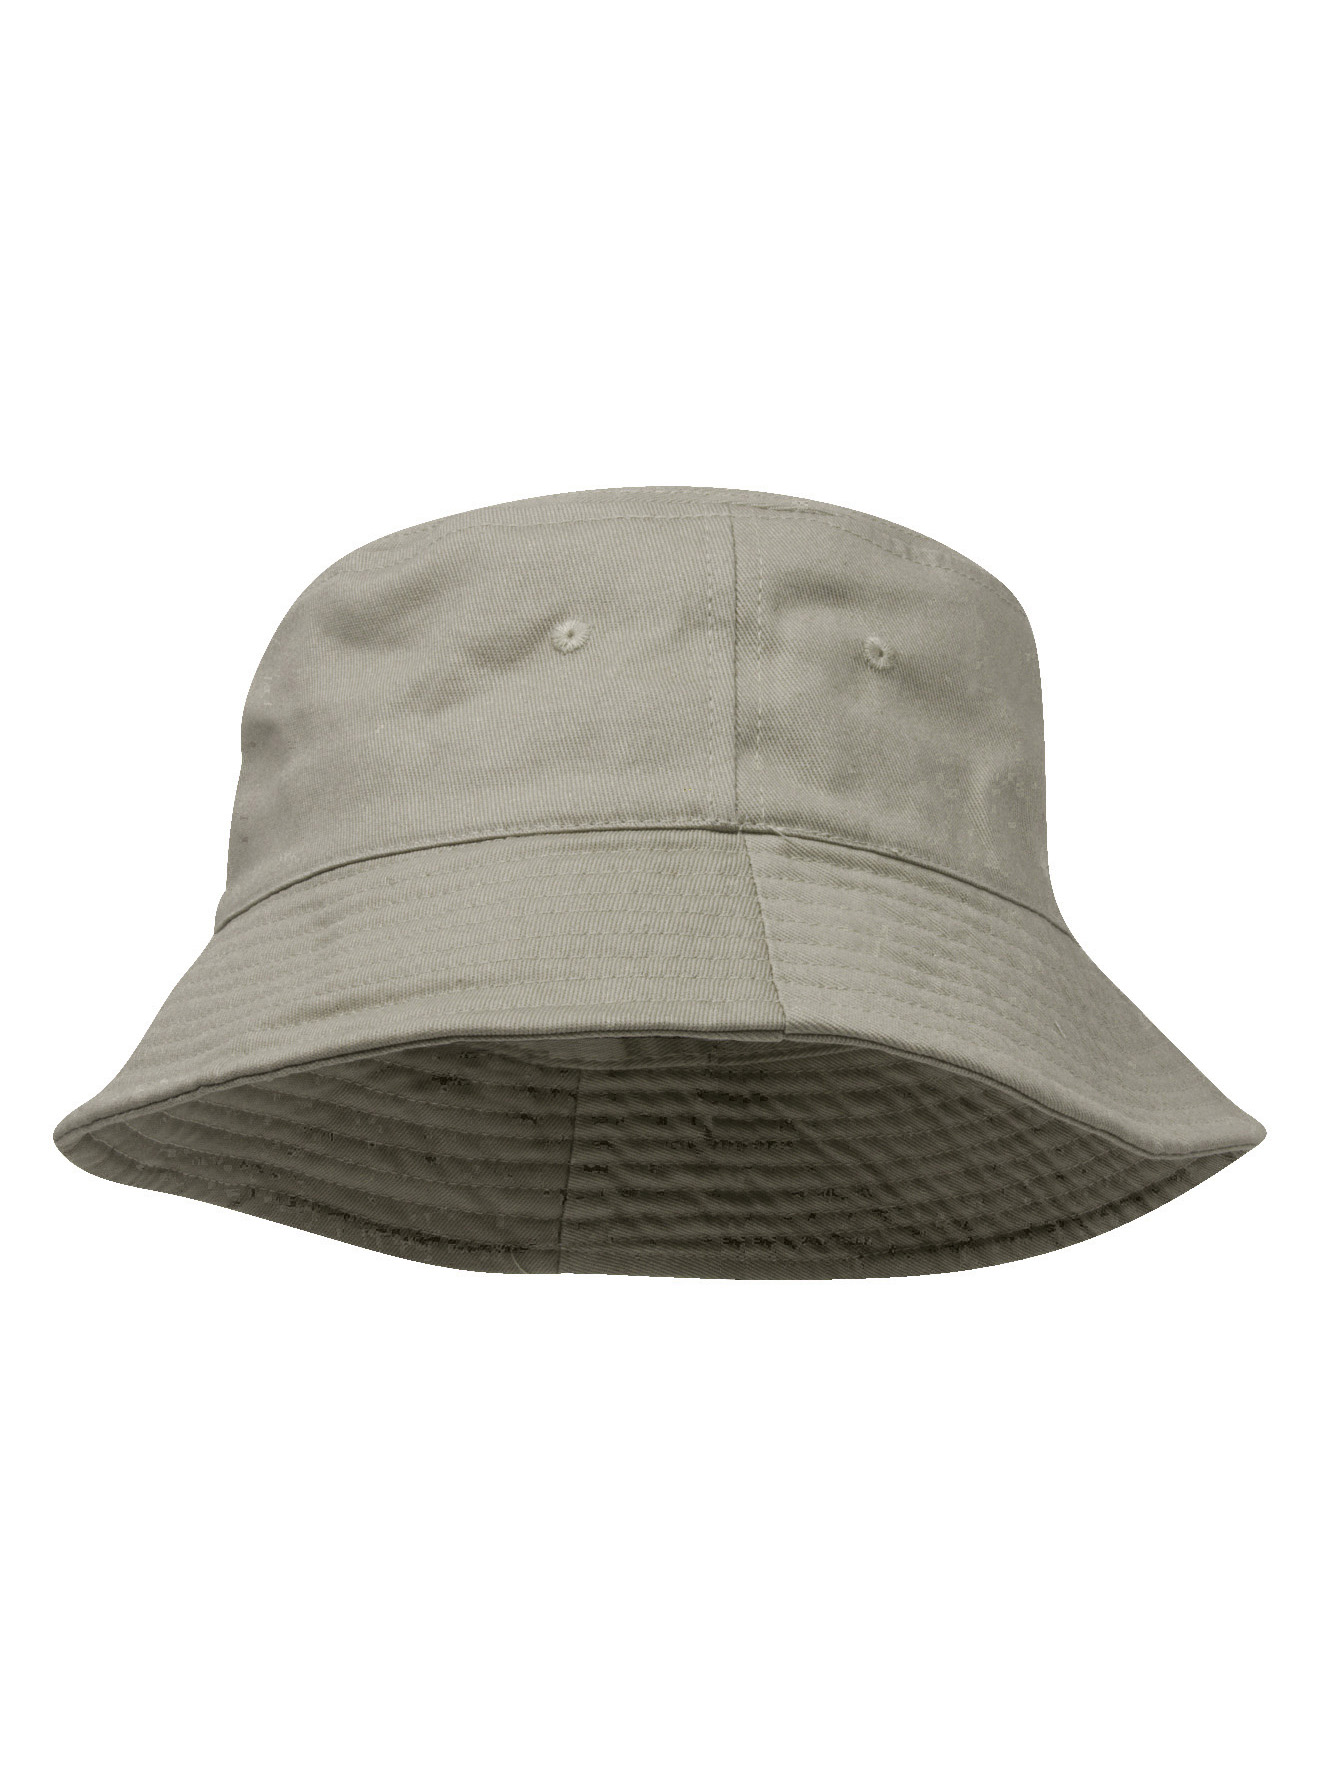 Youth Pigment Dyed Bucket Hat-Natural - image 1 of 3